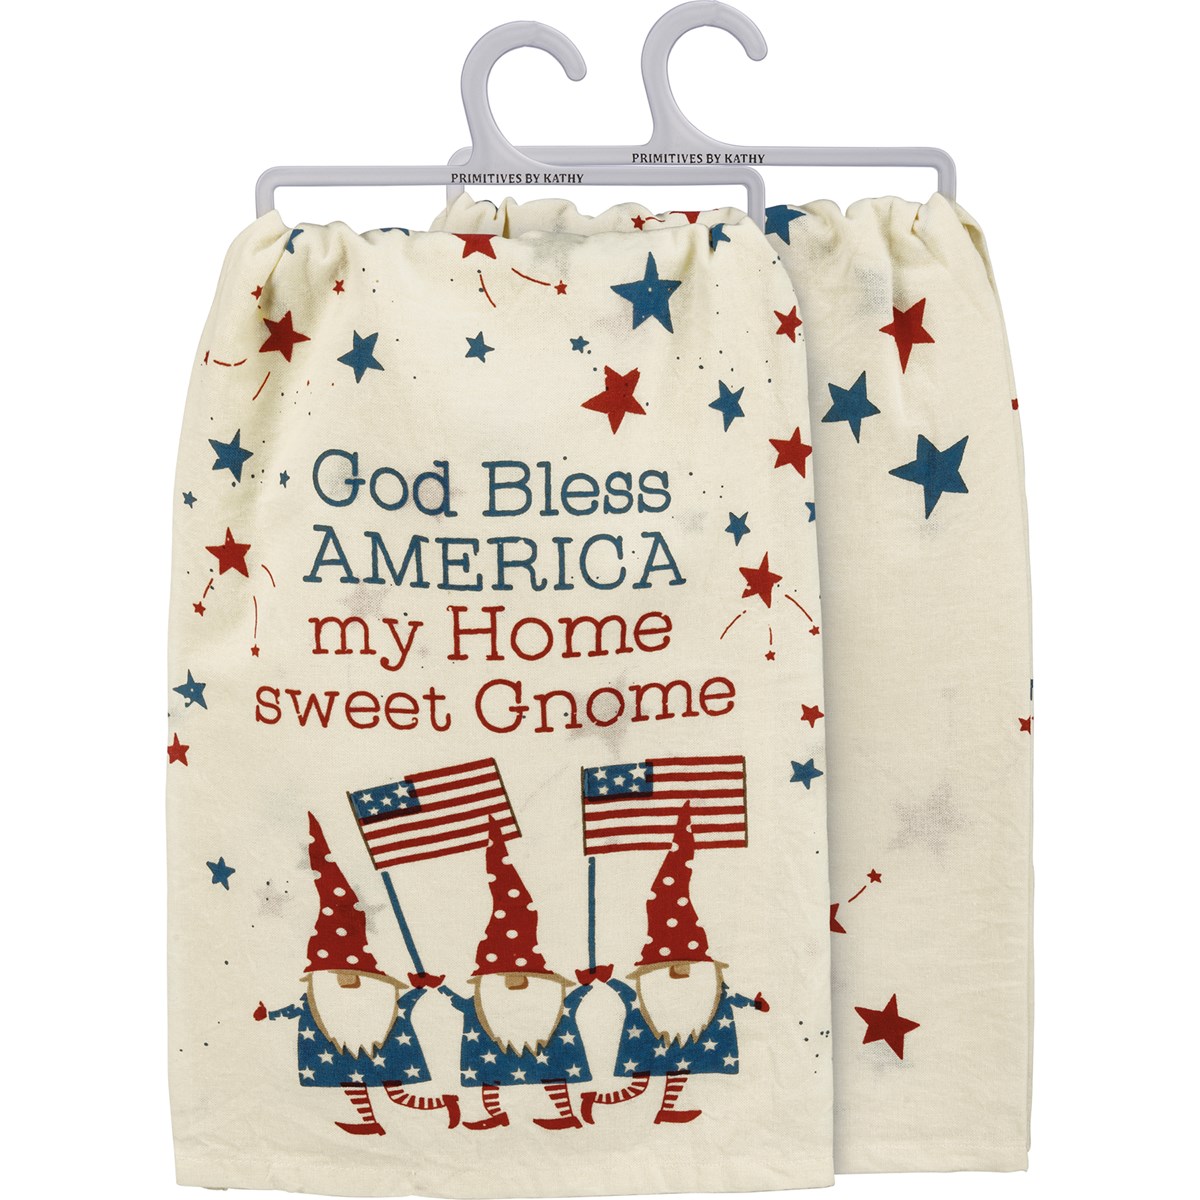 God Bless America Home Sweet Gnome Kitchen Towel - Cotton